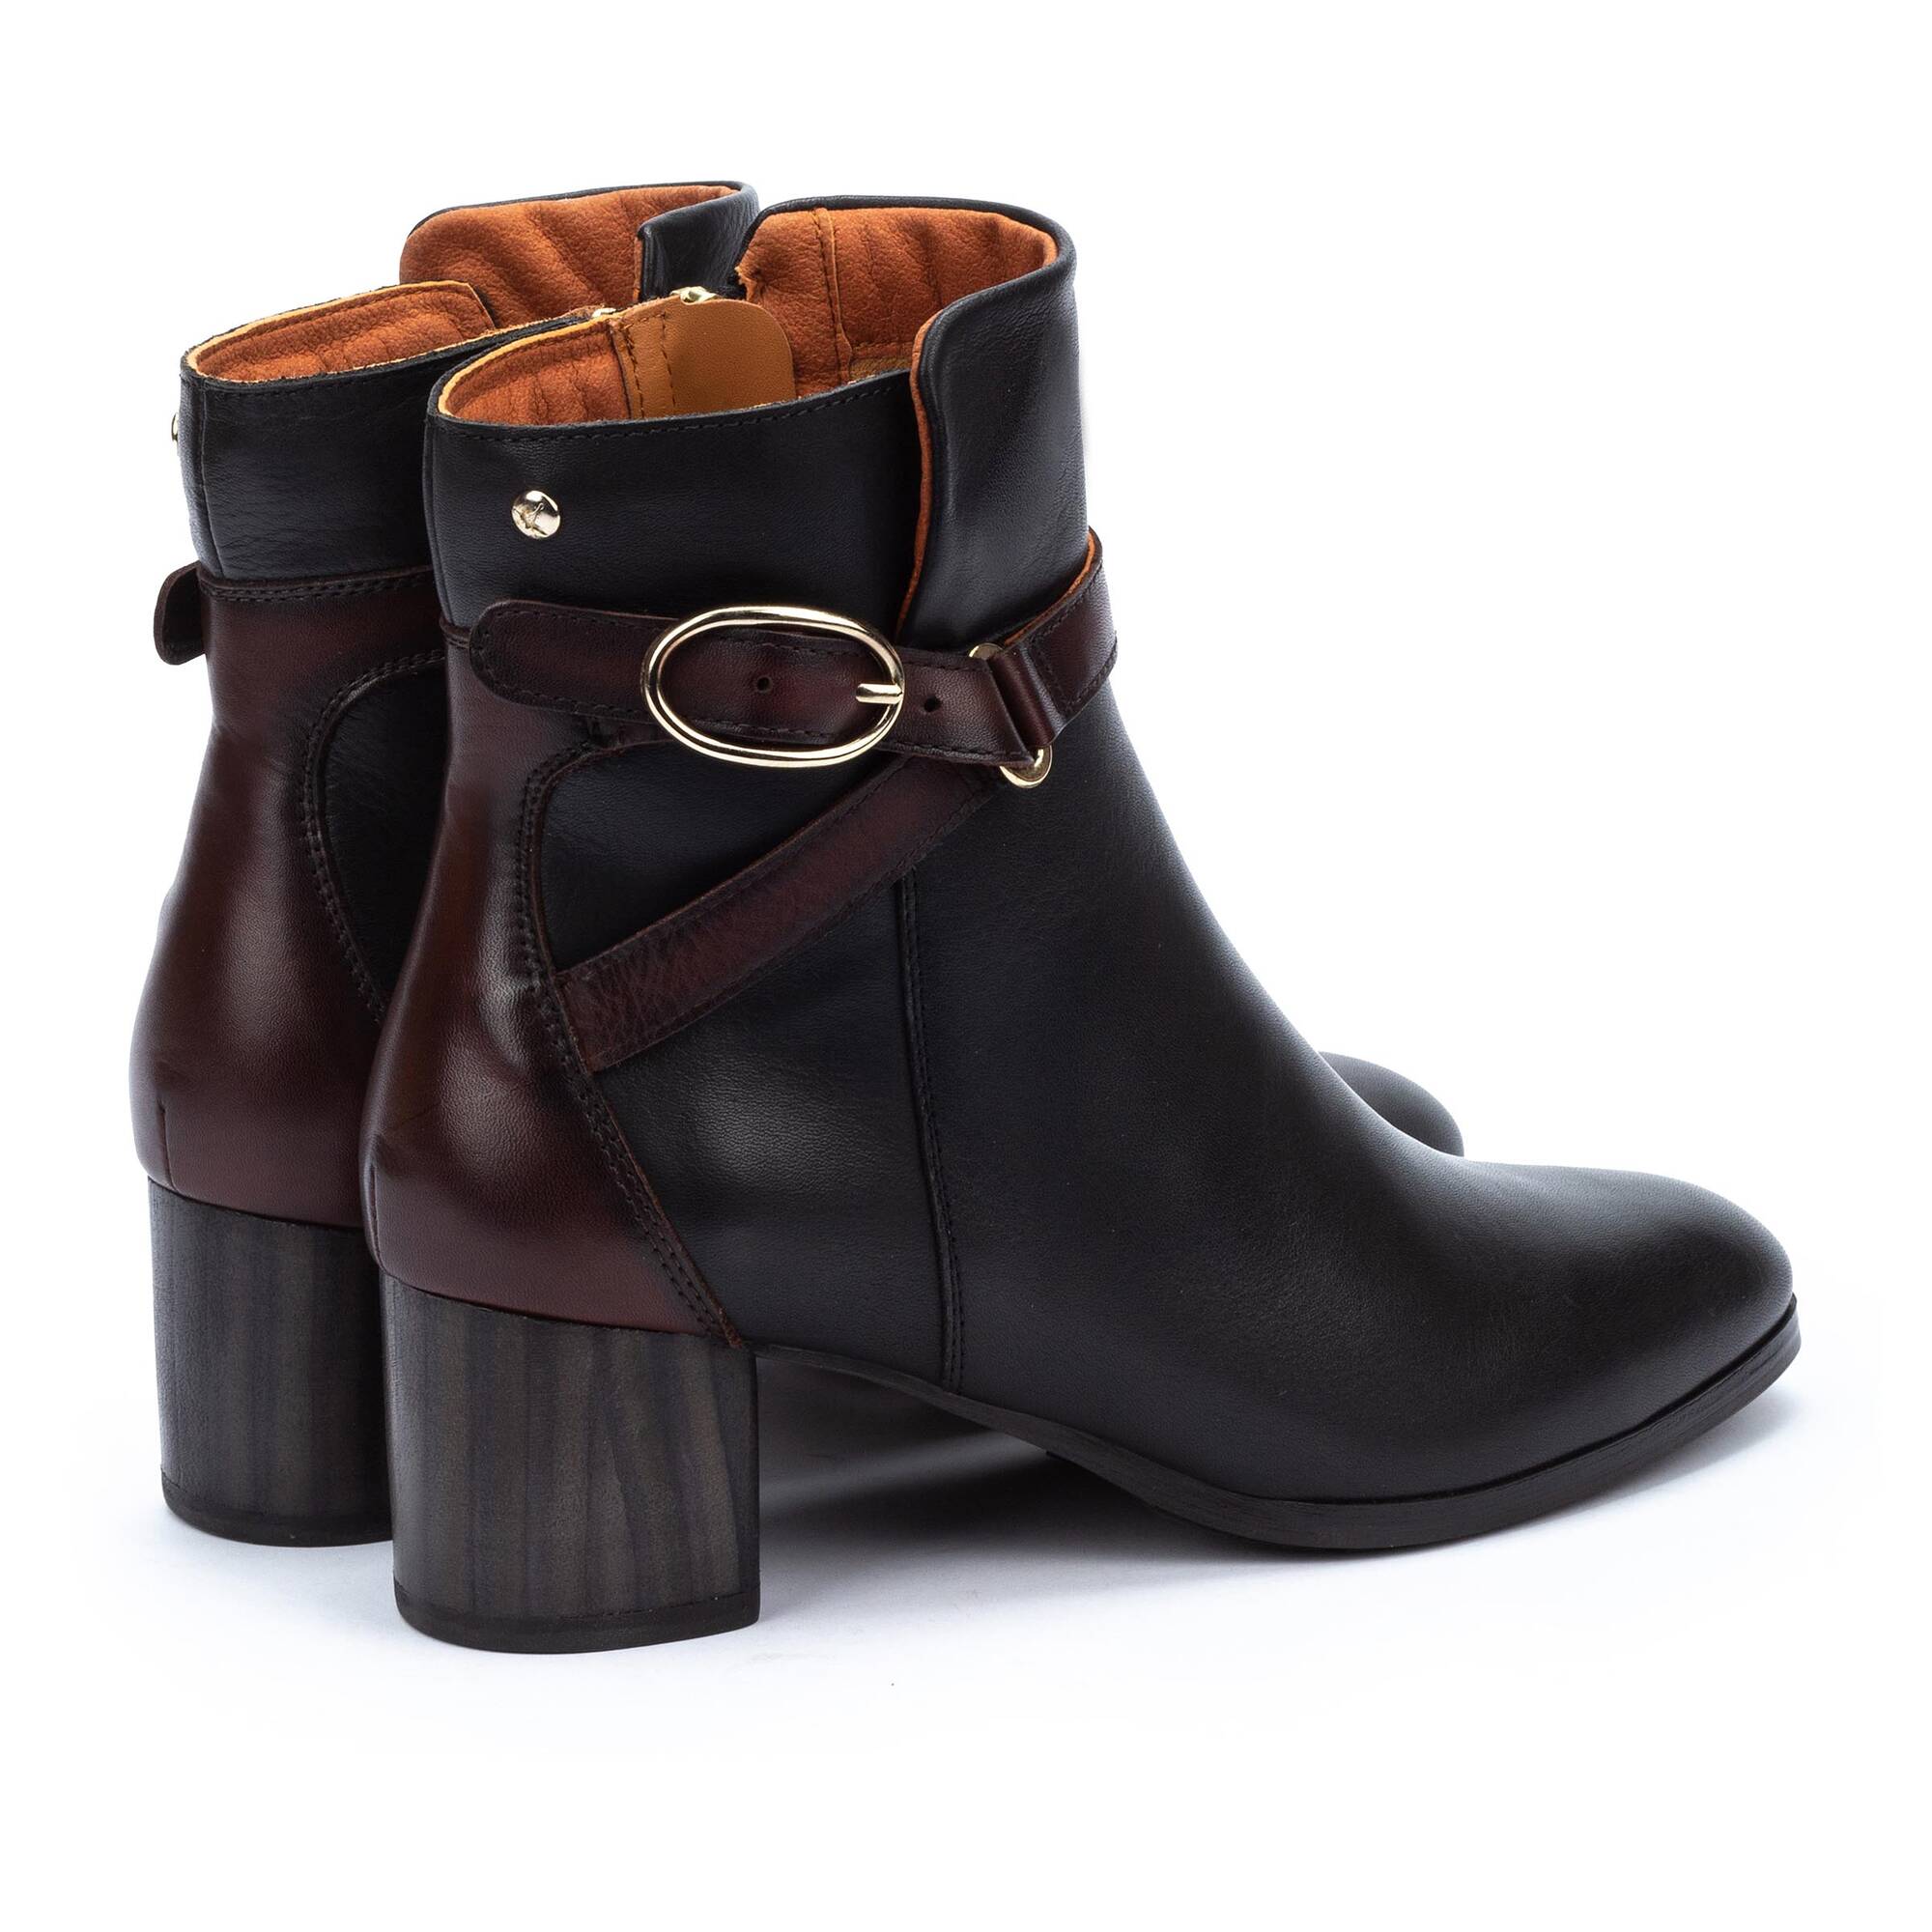 Women's Pikolinos Calafat Ankle Boots with Buckle Color: Black